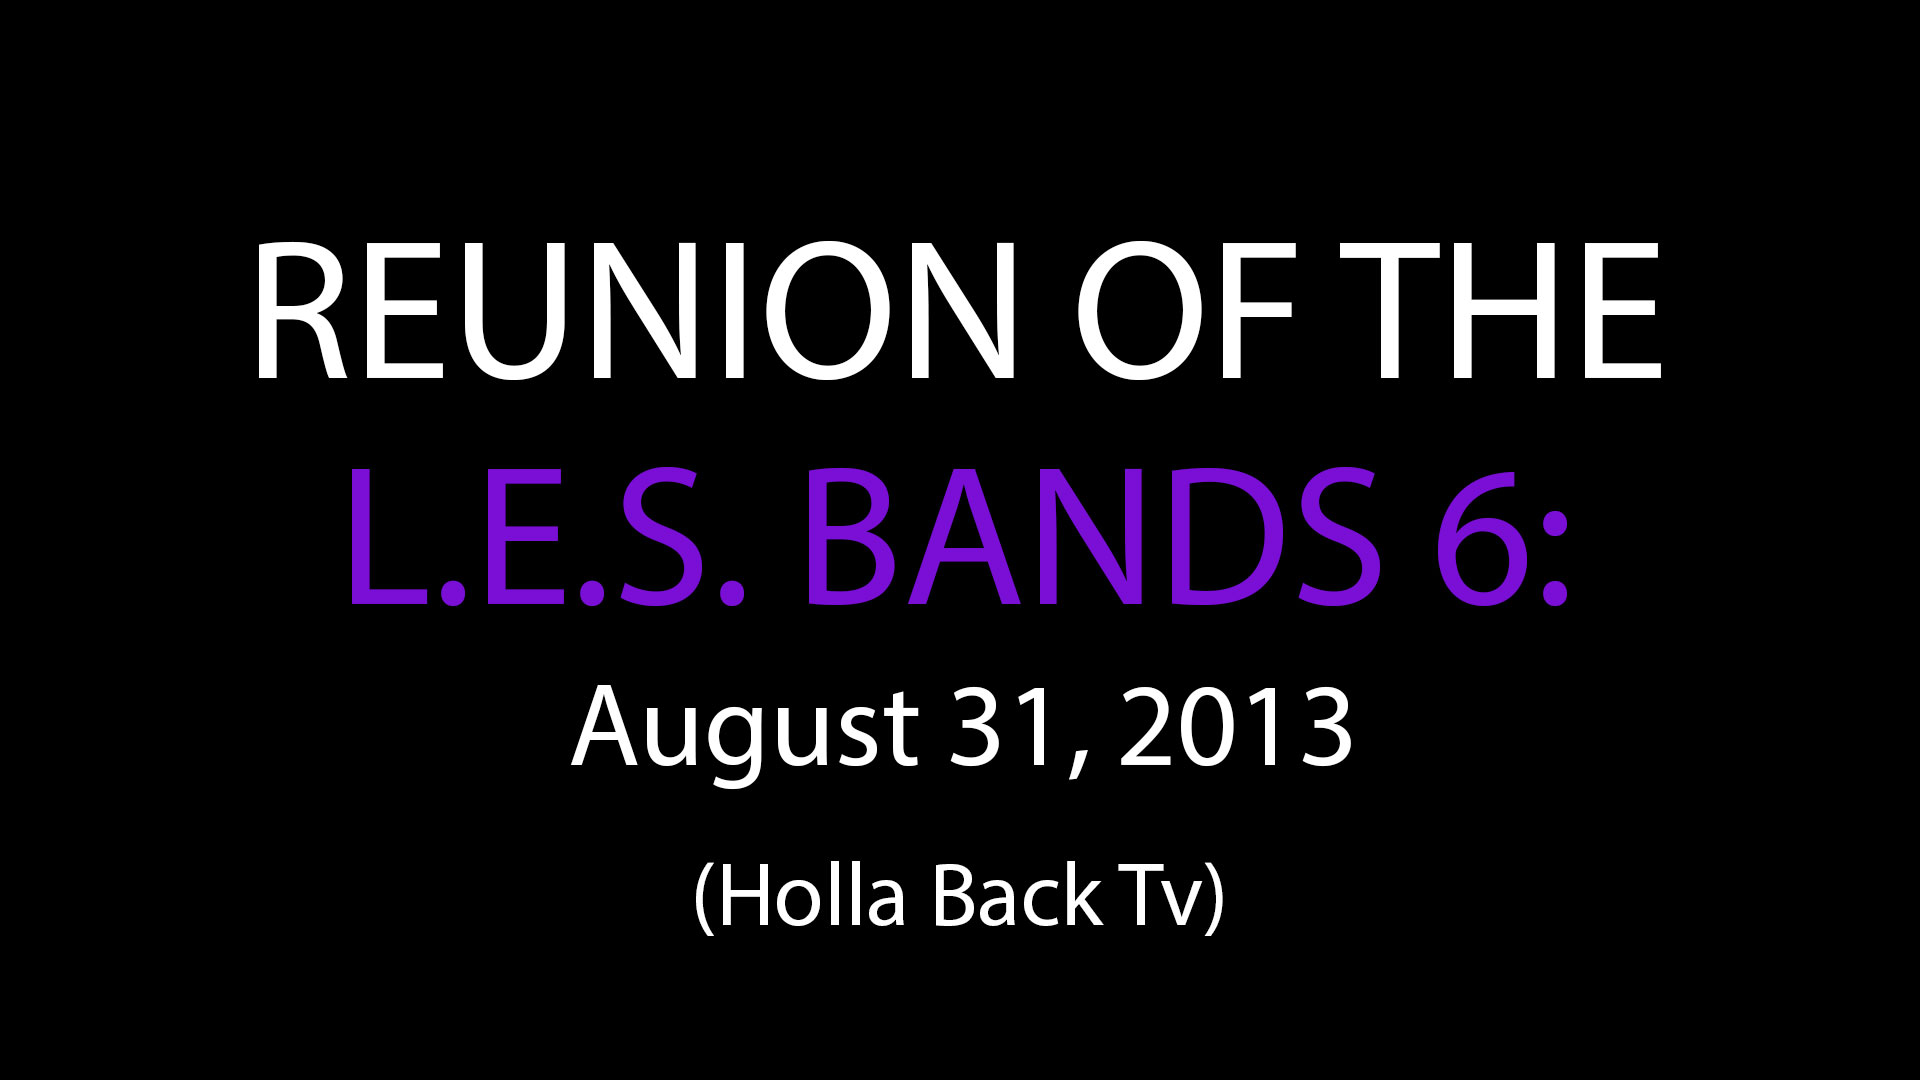 Reunion of the L.E.S Bands 6: 2013 - Promo (Holla Back Tv)